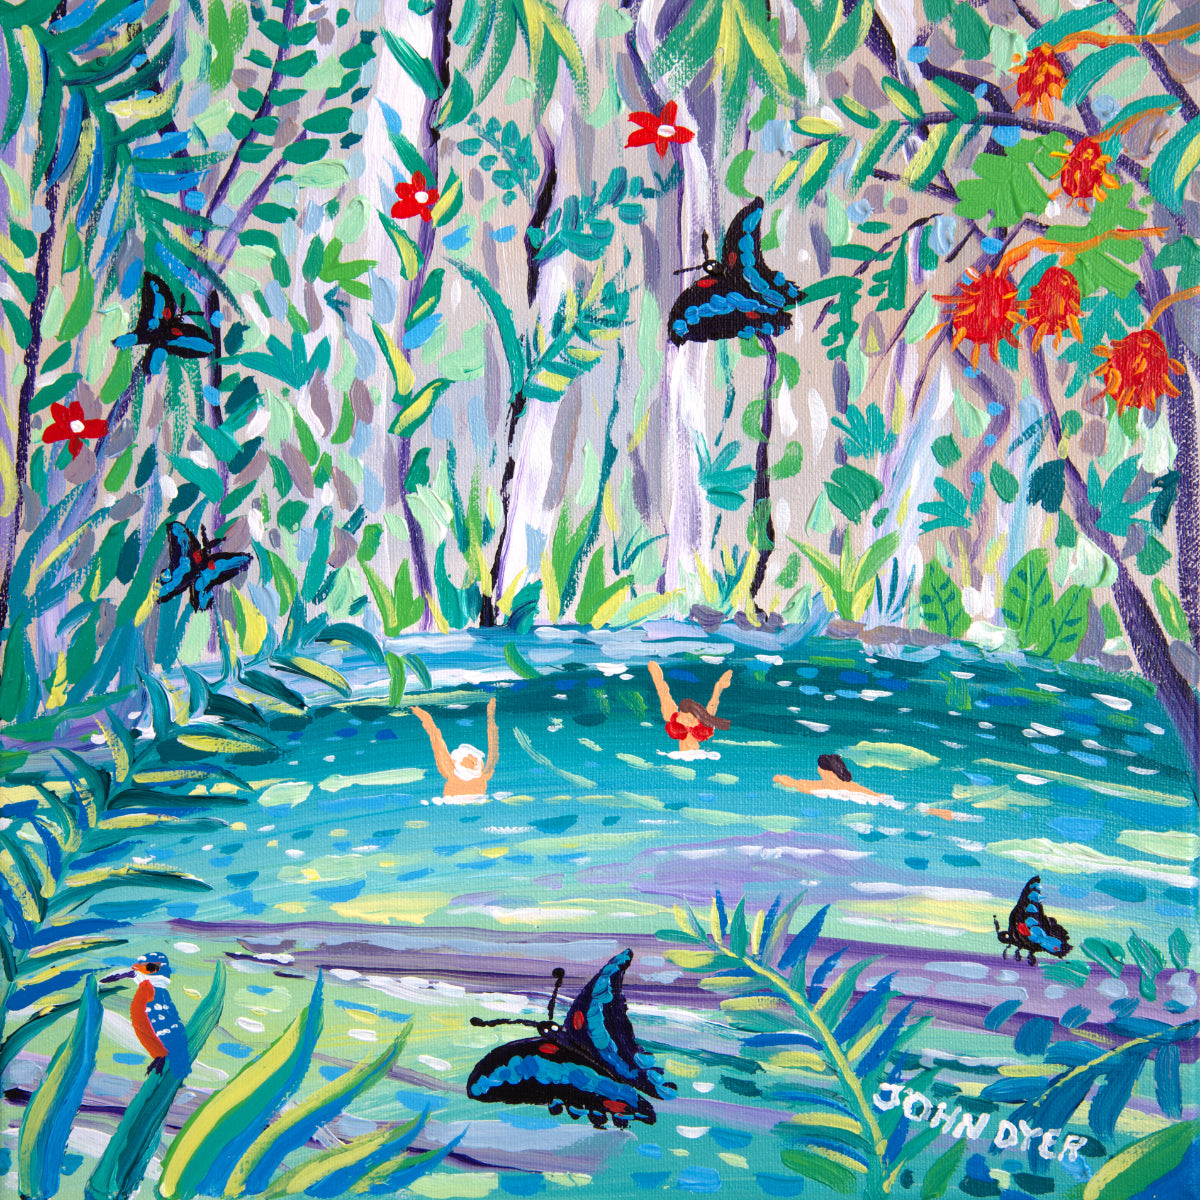 John Dyer Painting. Clearwater Cave Swimmers, Mulu, Borneo